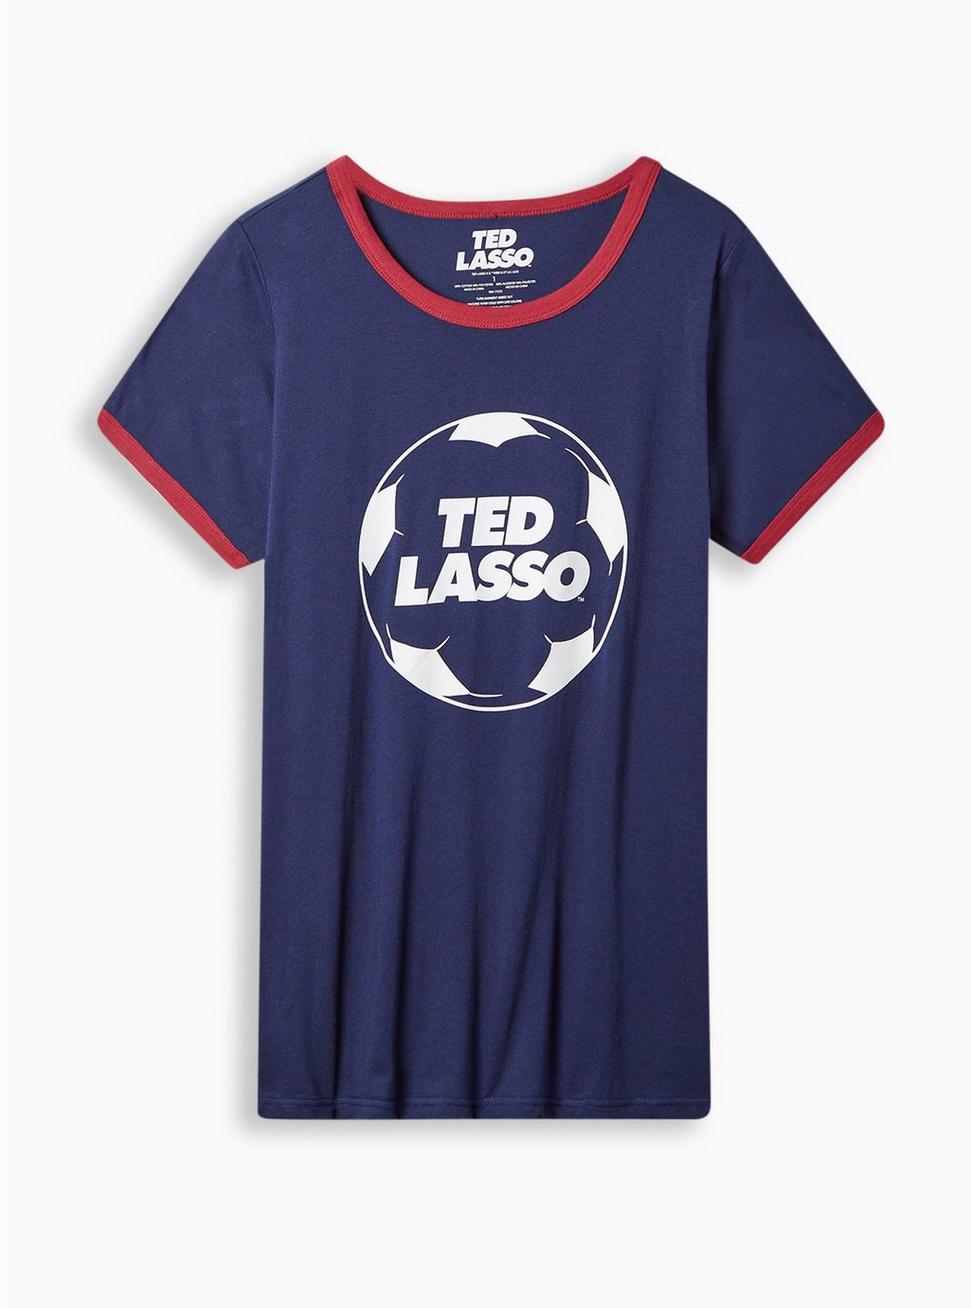 Ted Lasso Classic Fit Cotton Ringer Tee, NAVY, hi-res